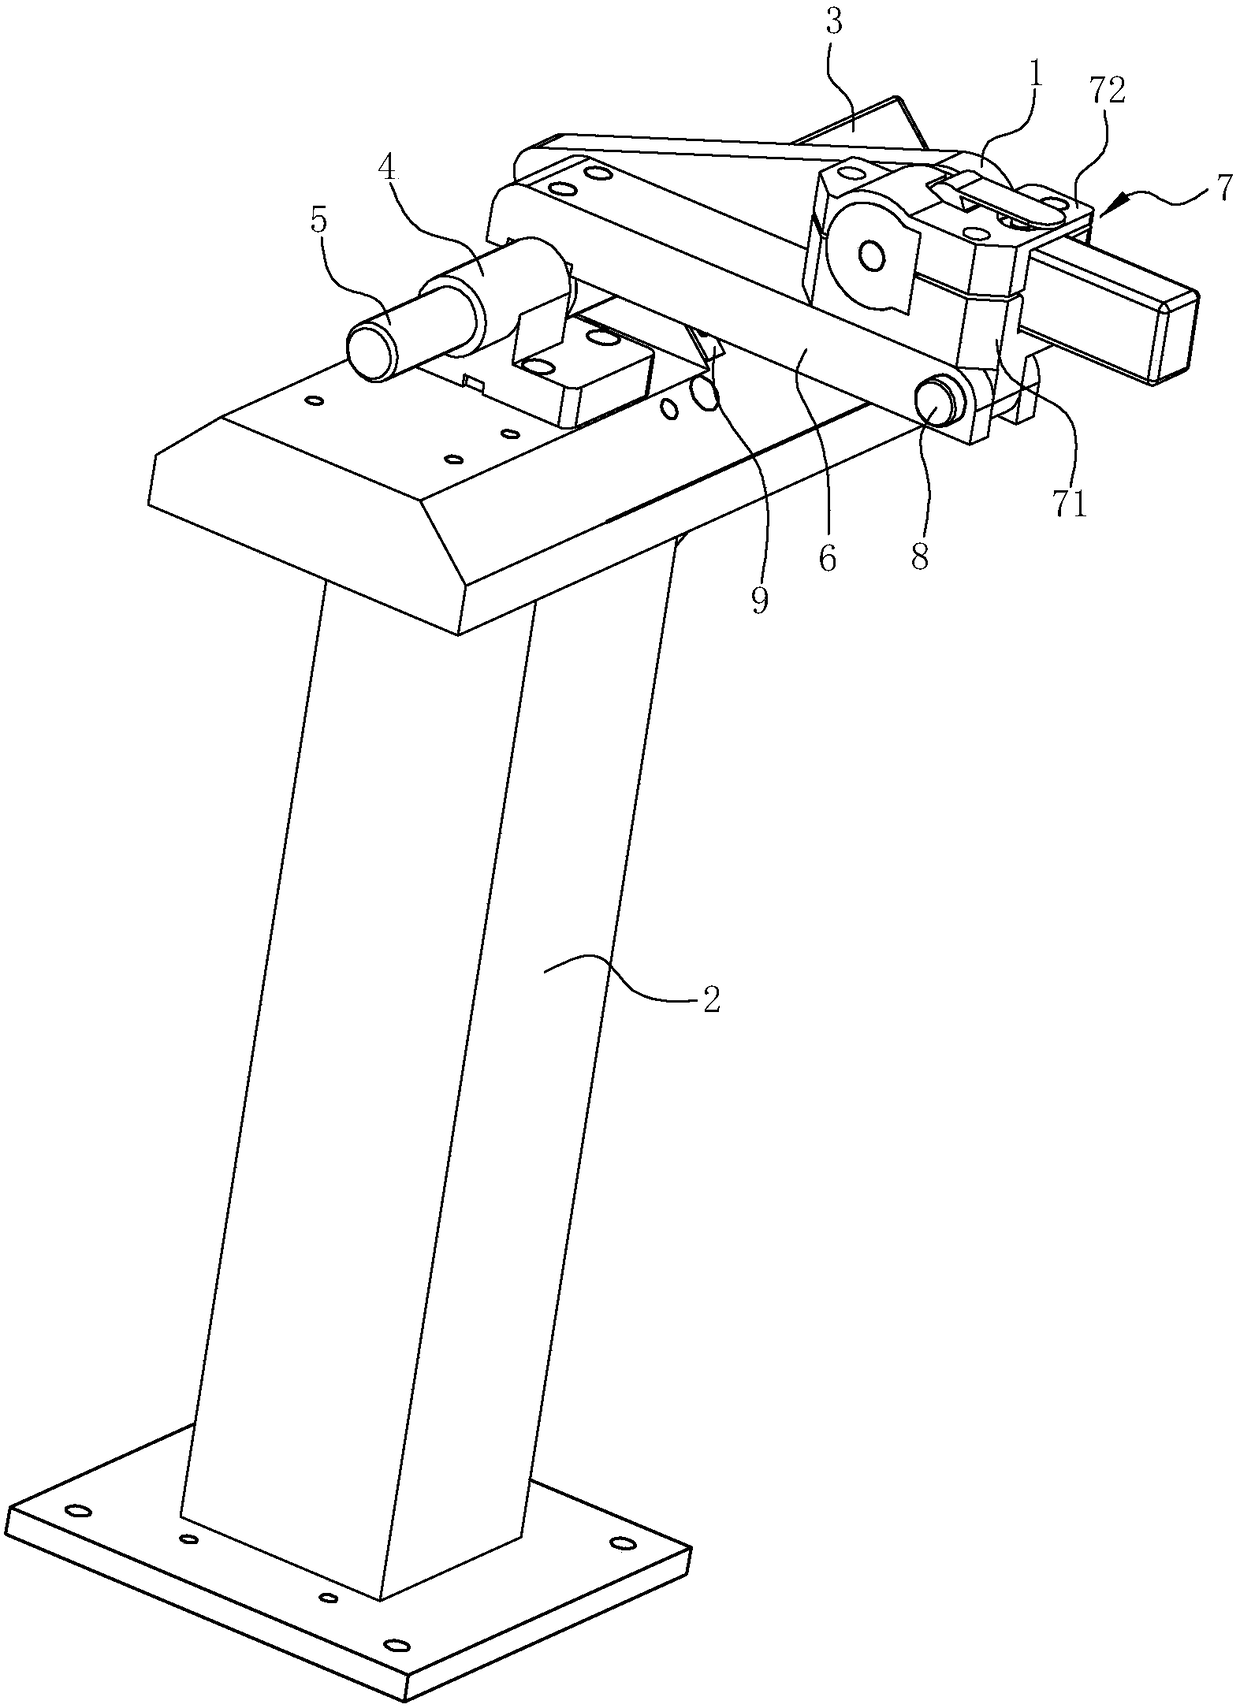 A fixed-size fillet grinding device